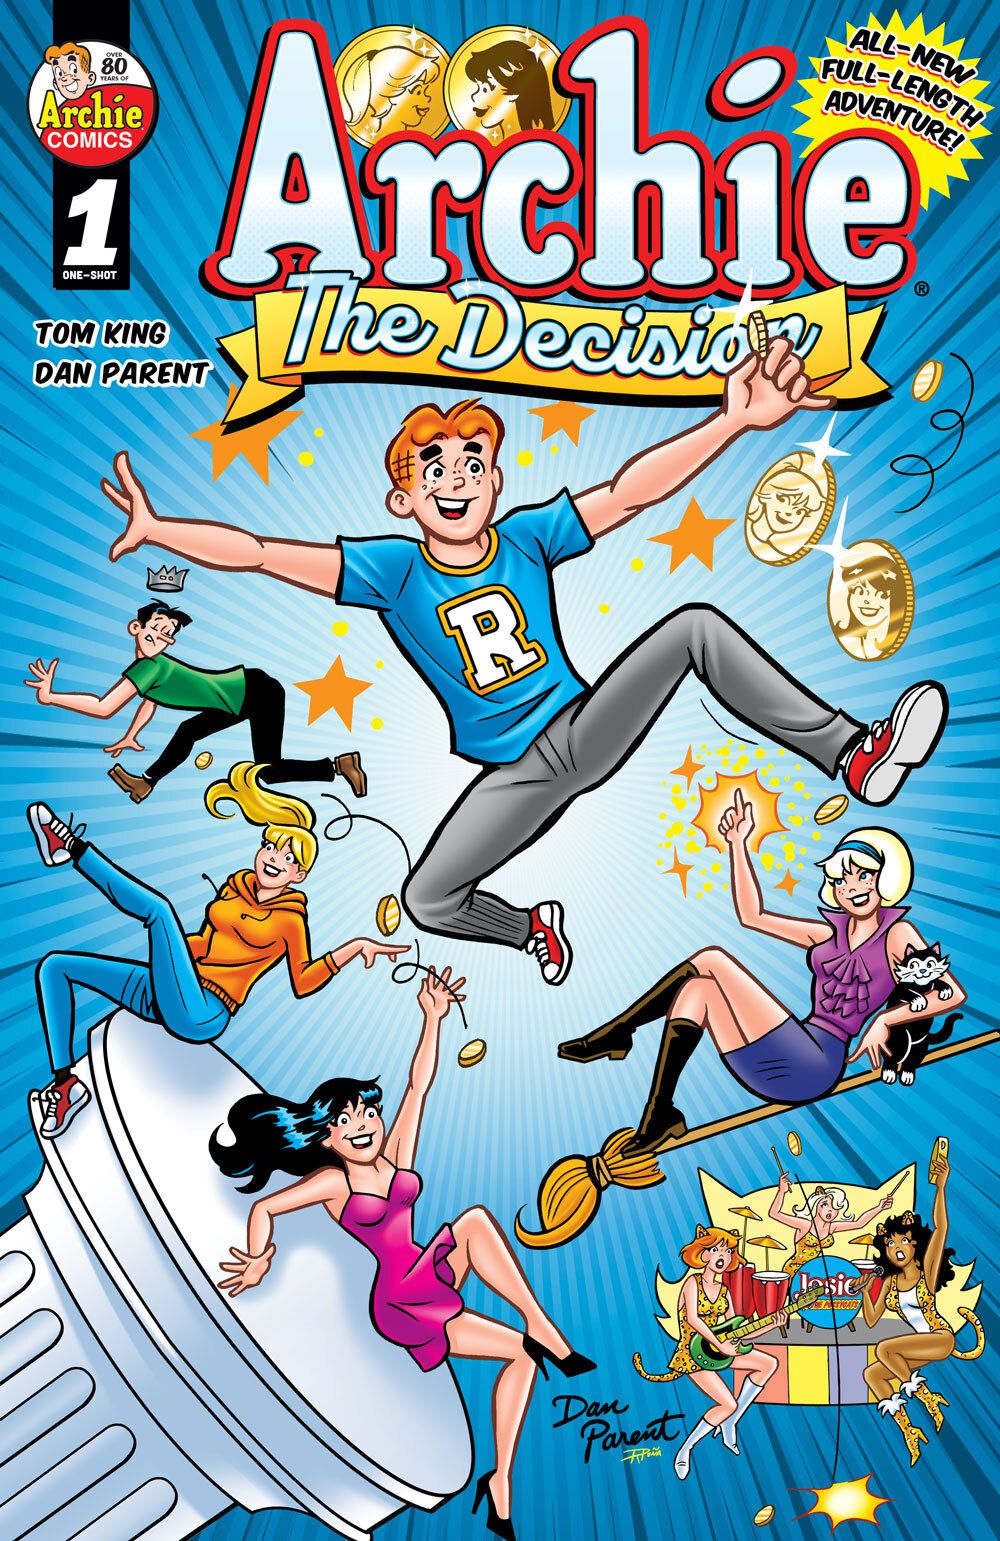 One cover of Archie: The Decision, a comic oneshot written by Tom King and Dan Parent